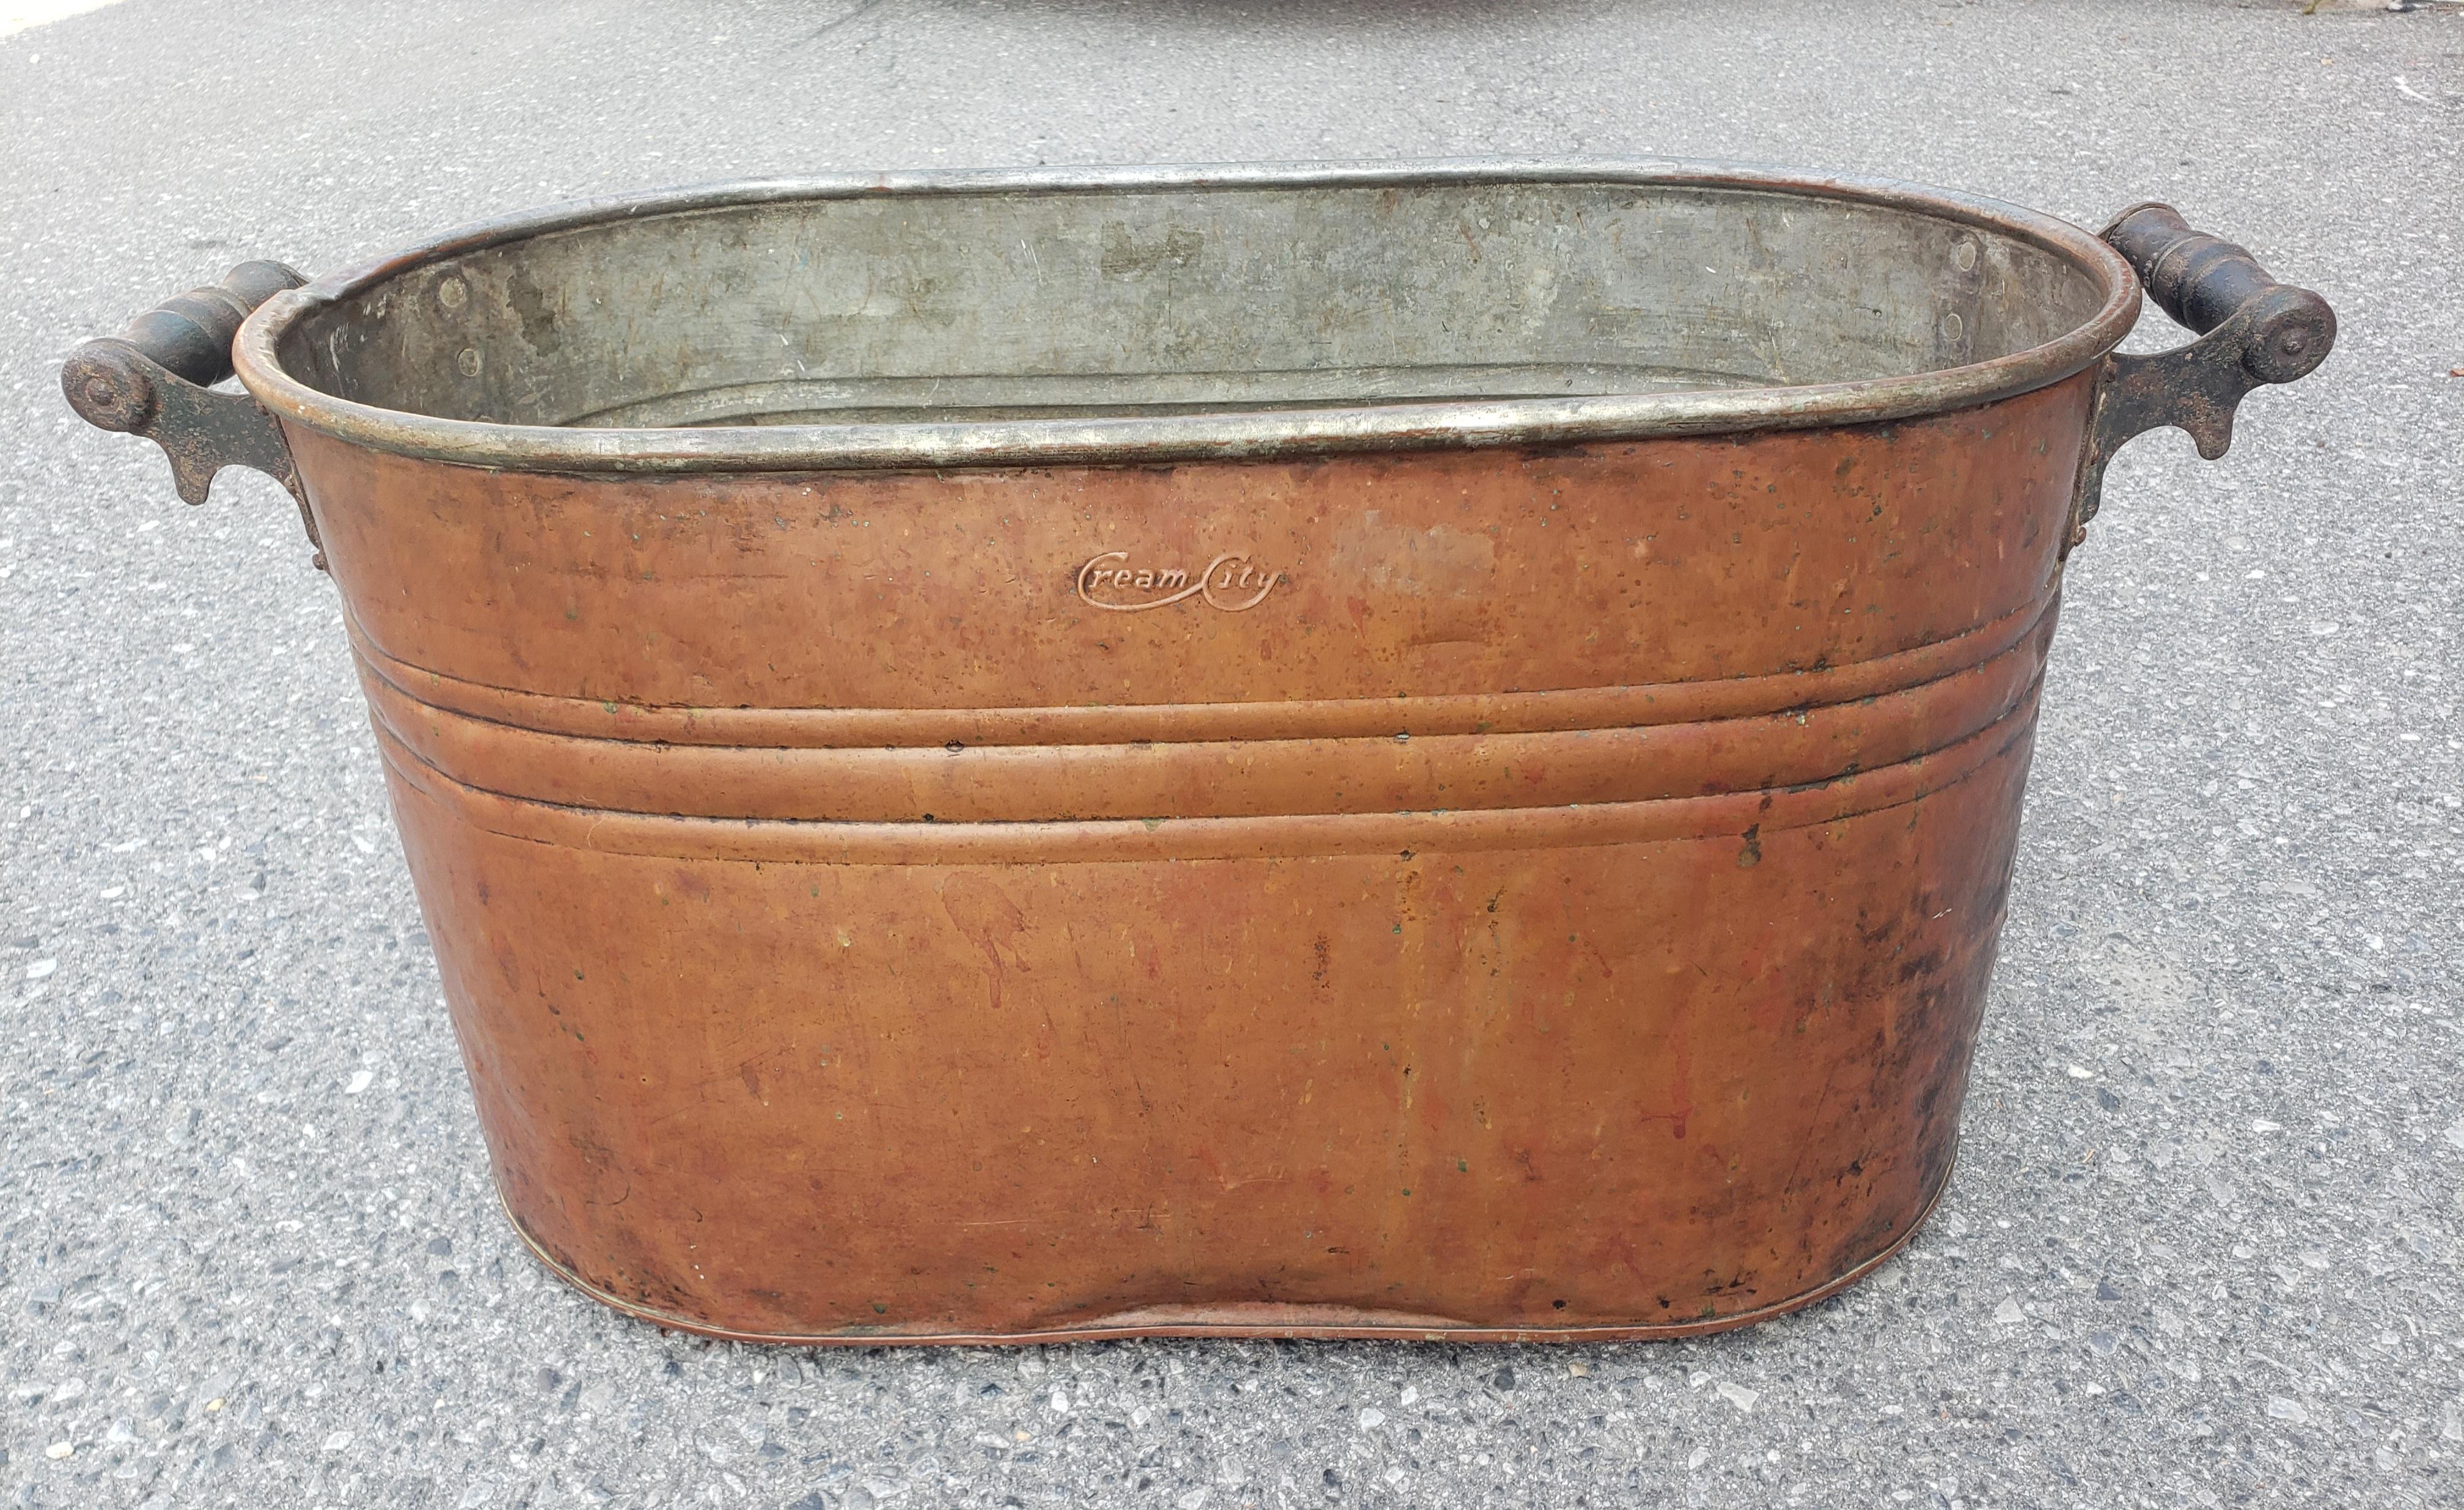 This antique copper finish wash boiler is marked CREAM CITY (Milwaukee). It's been lightly cleaned but not deeply polished, I left it in found vintage condition. It shows a lot of great character, with a few minor dents, aged copper with some